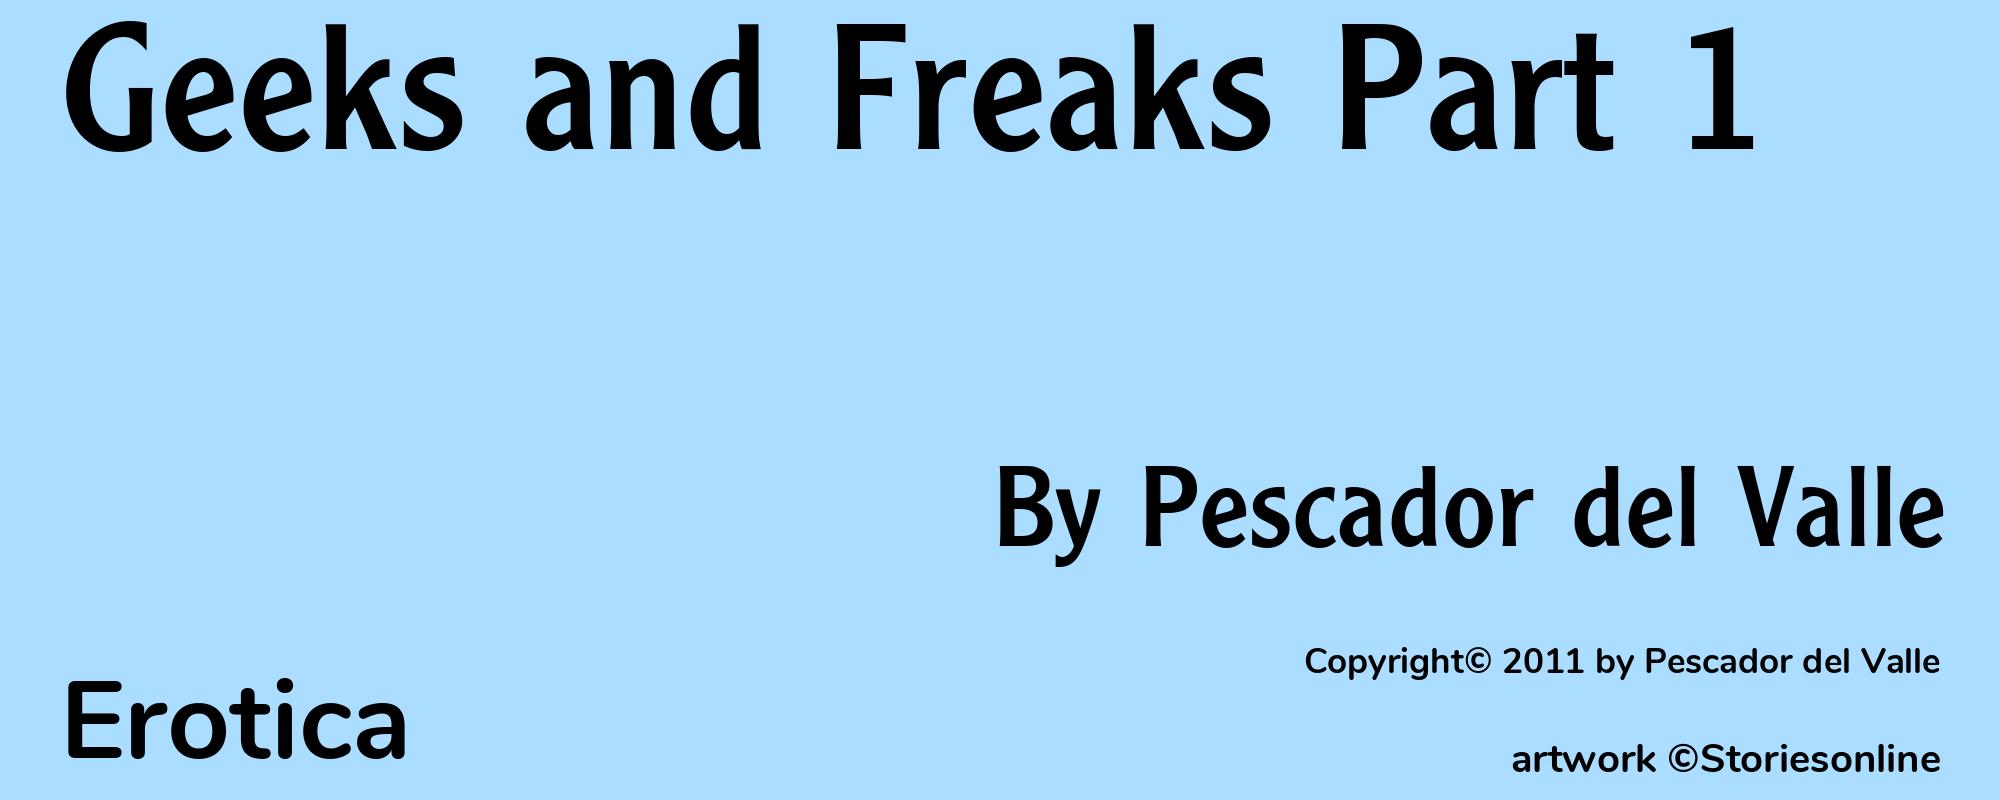 Geeks and Freaks Part 1 - Cover